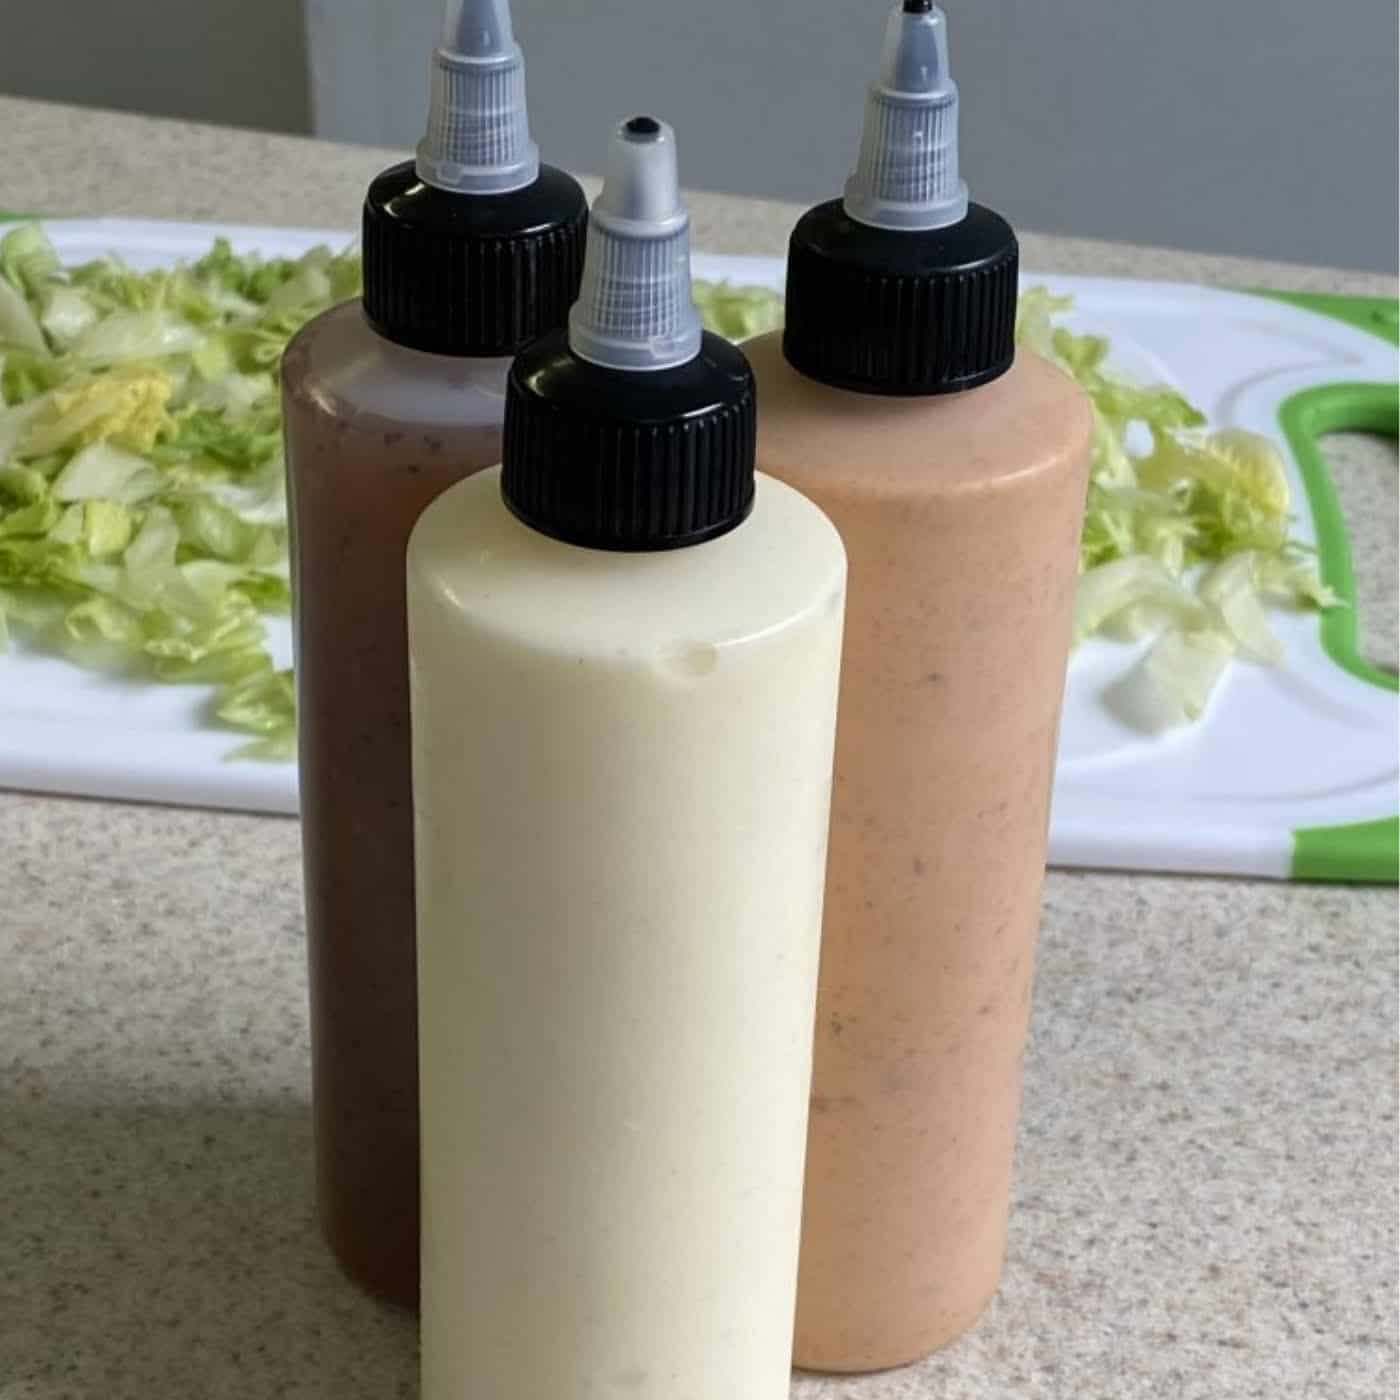 5 Minute Copycat Subway Mayonnaise in bottles